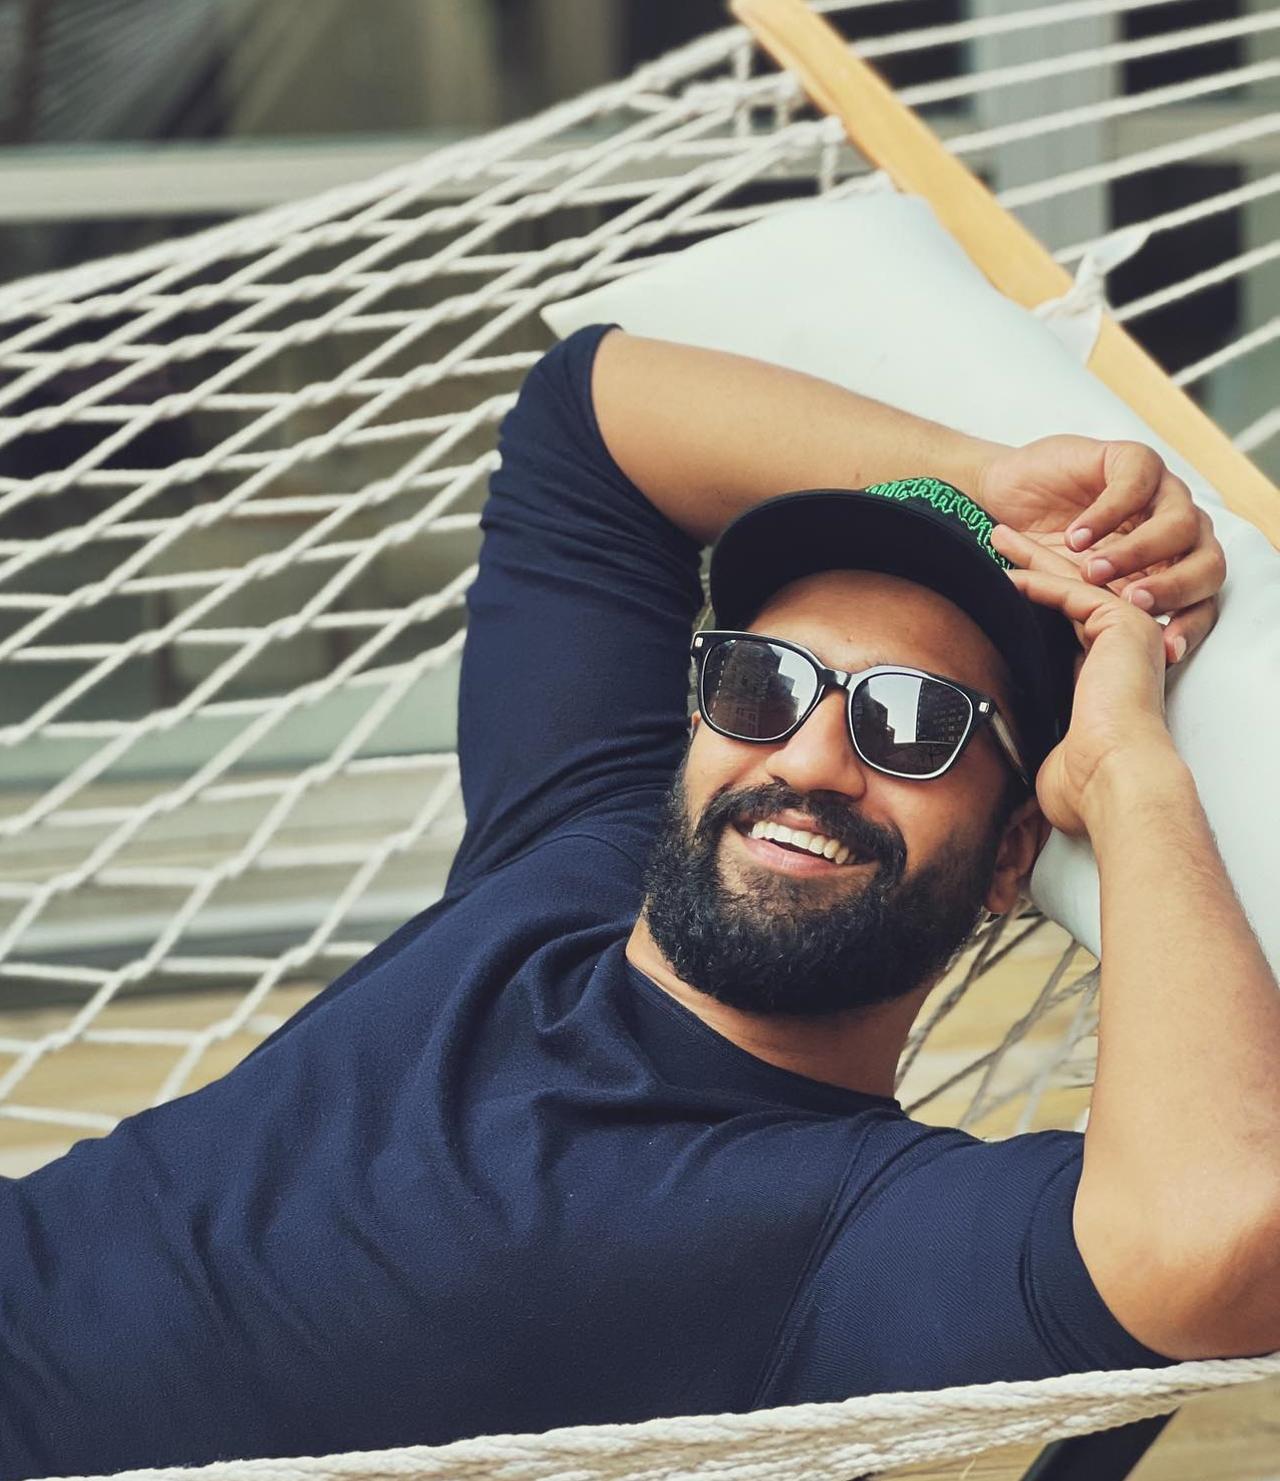 Vicky Kaushal turned 34 yesterday on May 16. The actor has now shared some adorable pictures with fans on social media. He even wrote a lovely caption and the images were lovlier. 